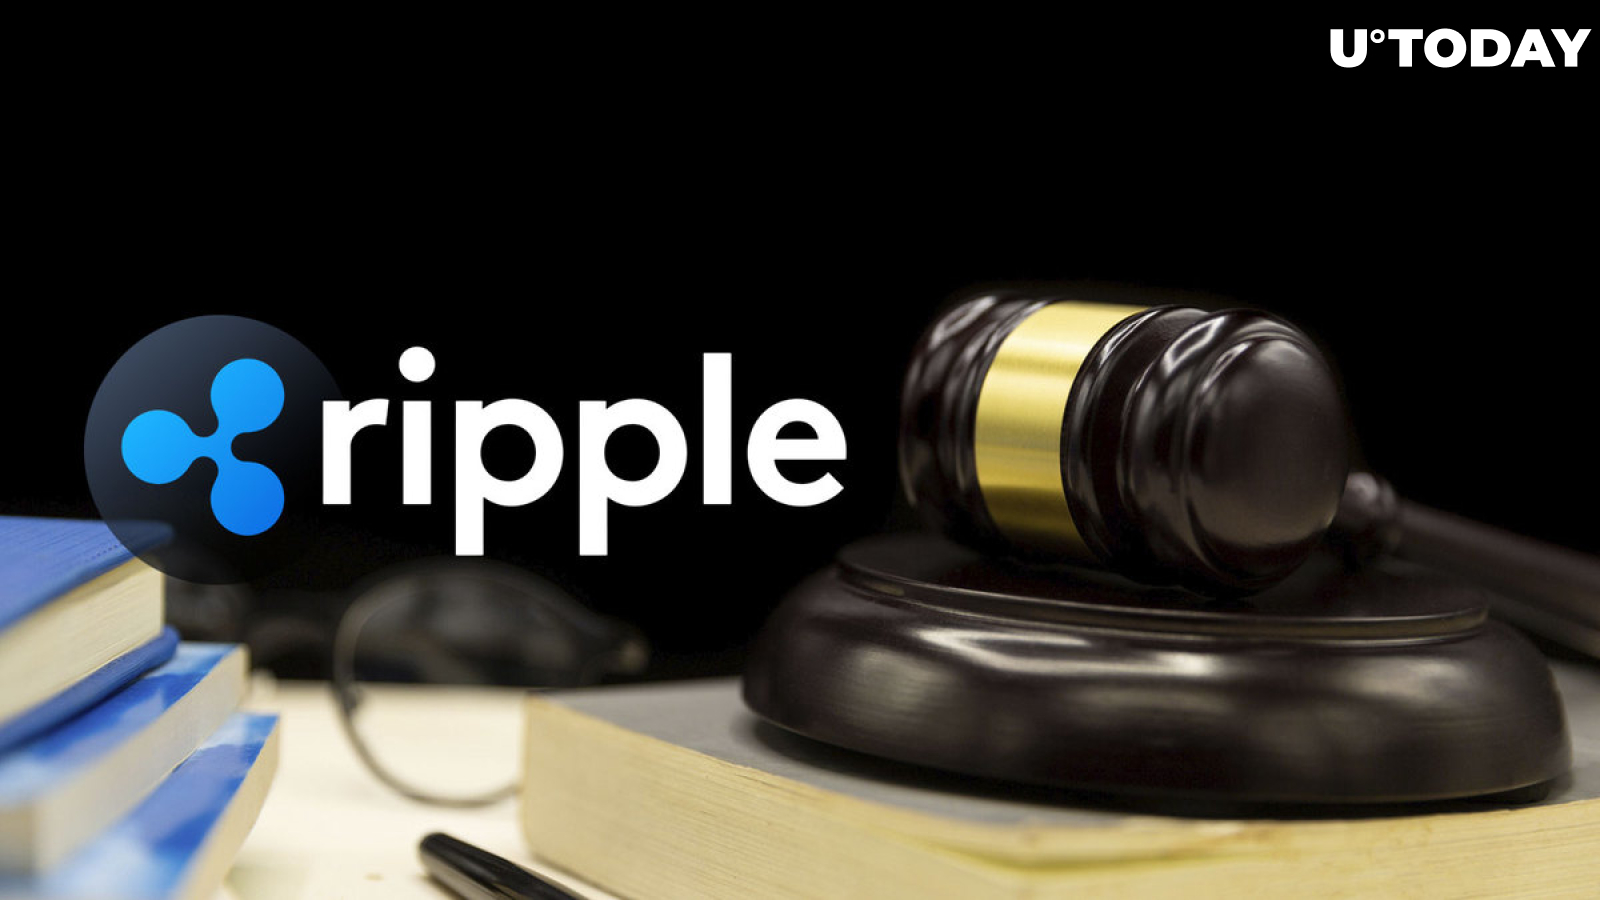 Pro-Ripple Lawyer Reacts to Imminent $5 Trillion Buying Pressure for Risk Assets